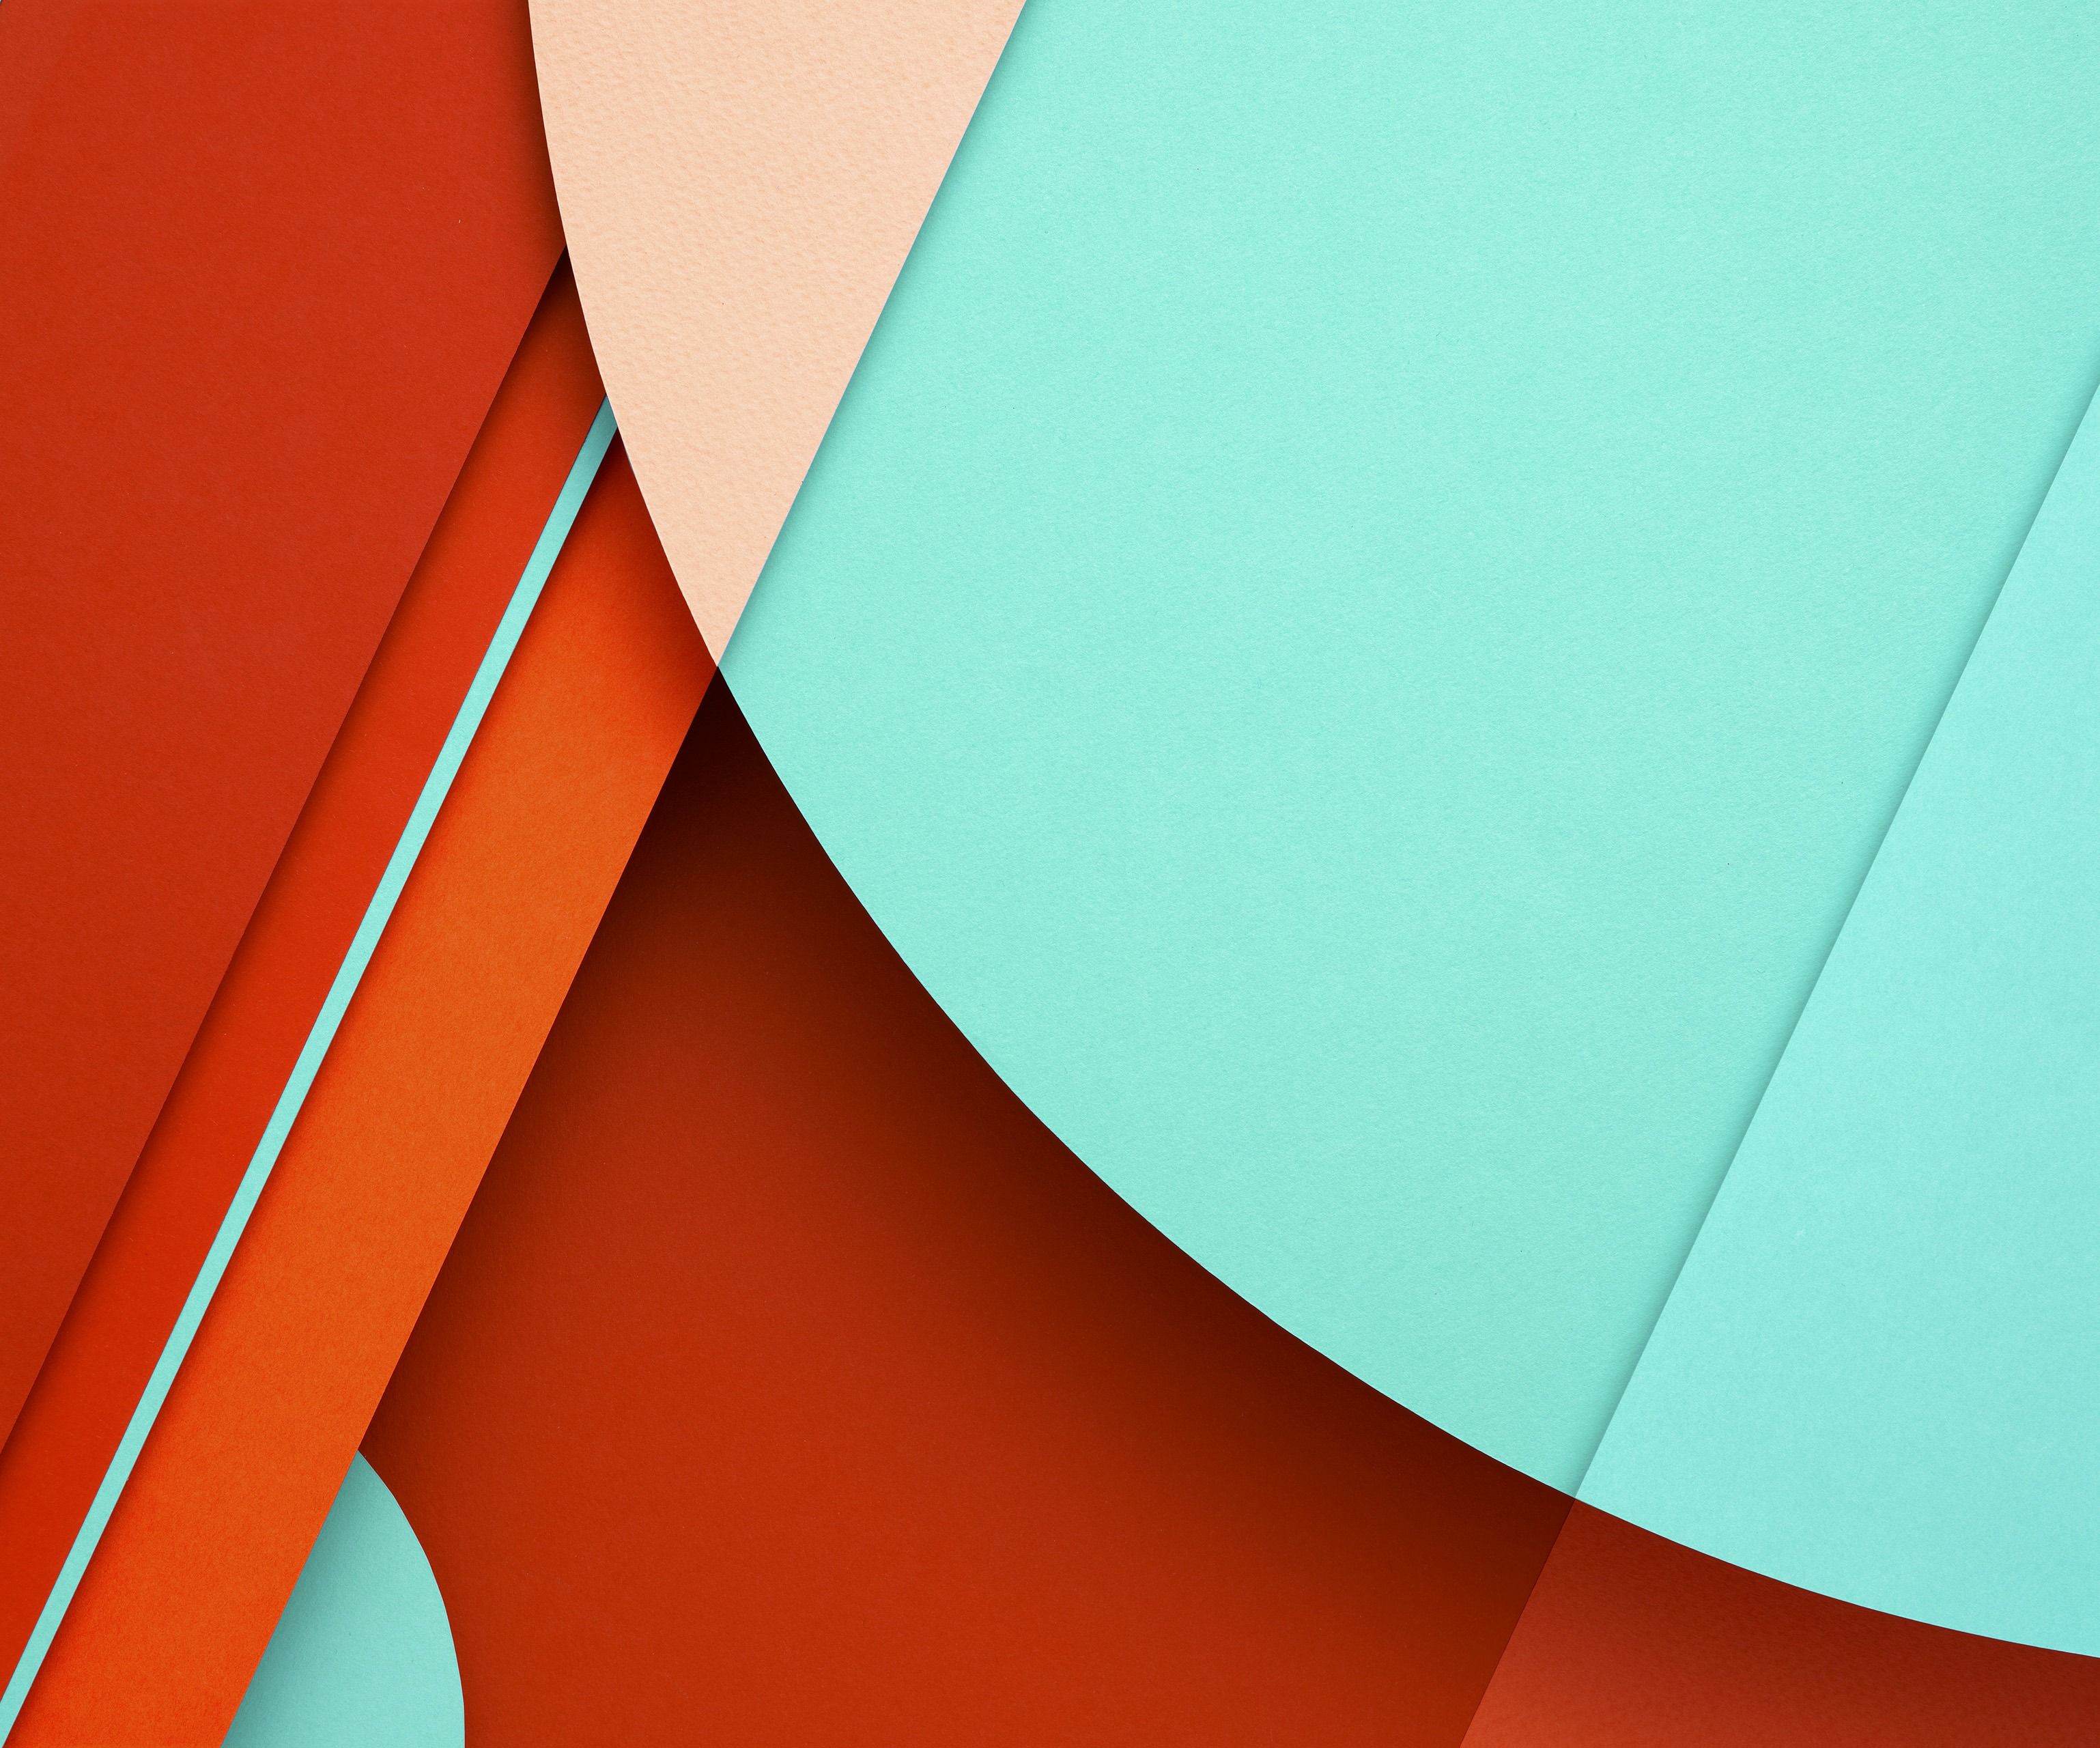 Android 5.0 Lollipop wallpapers: see the full pack here